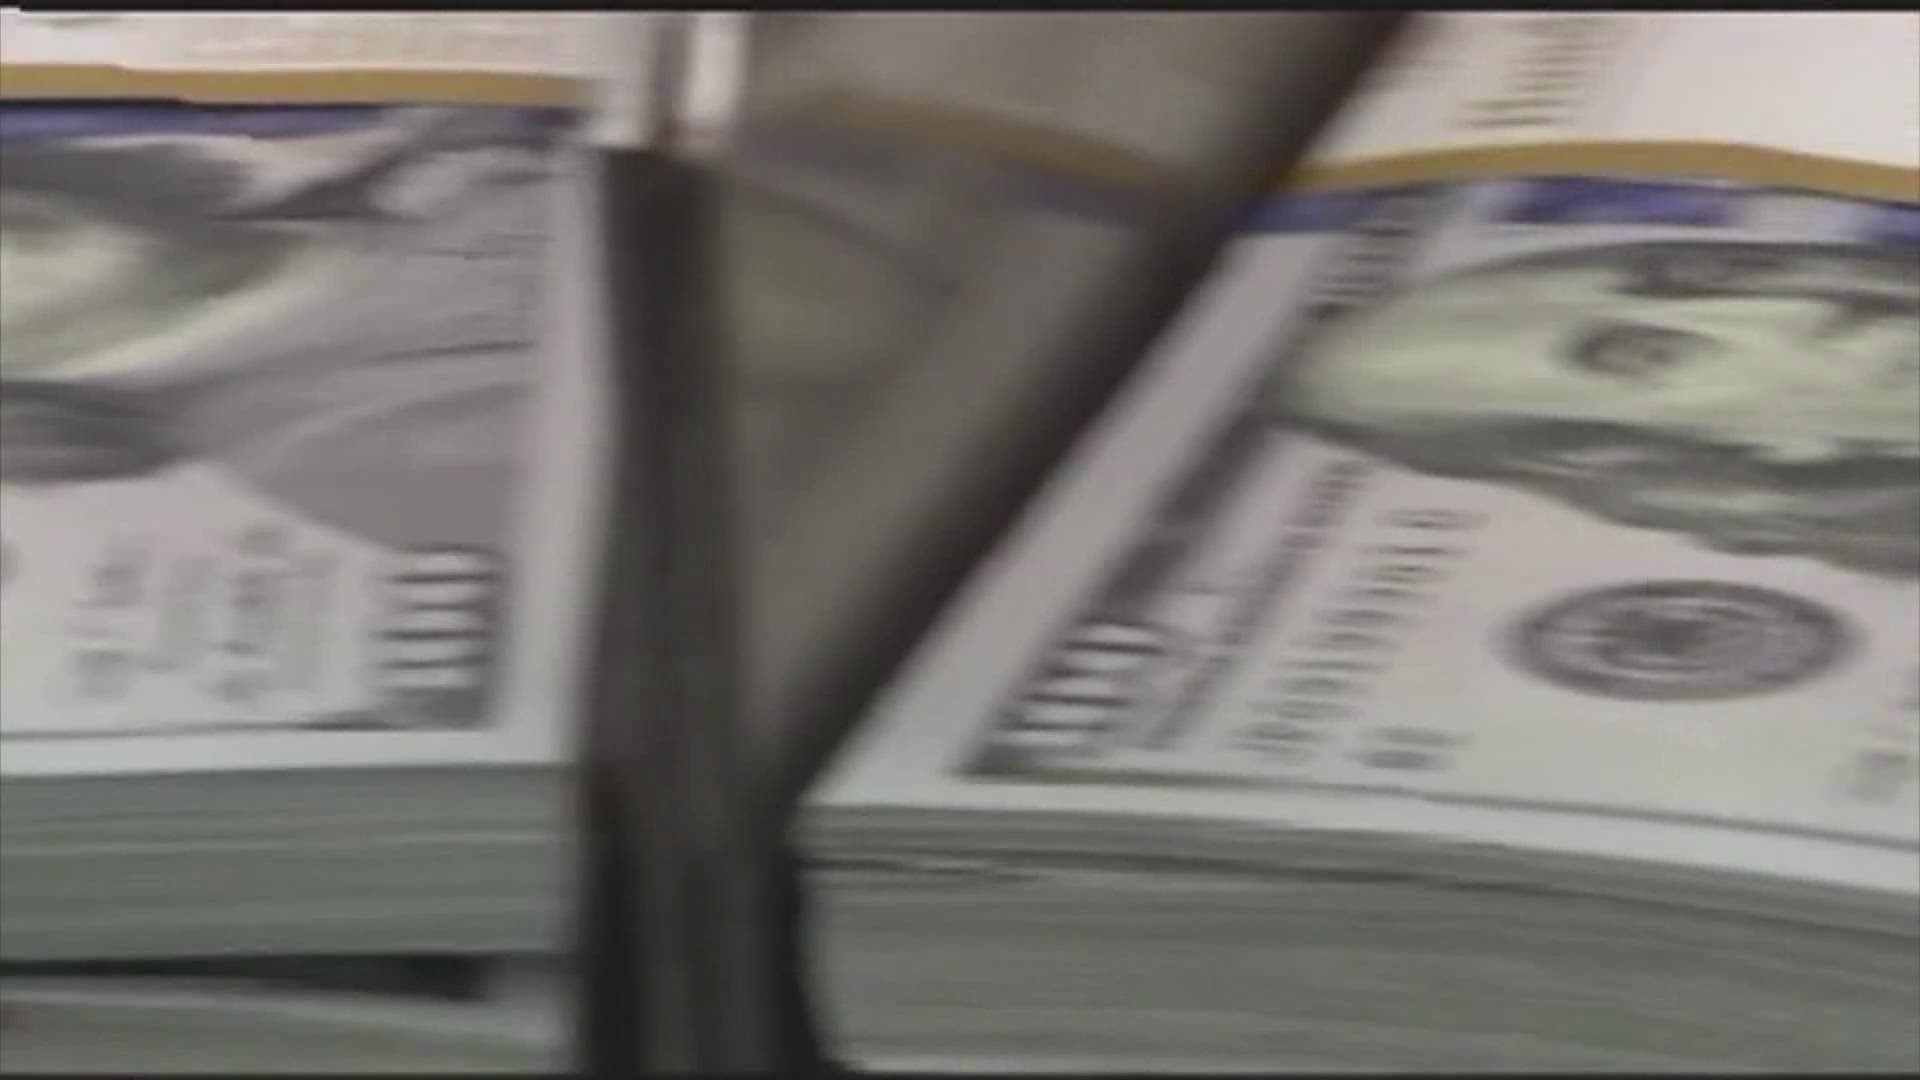 Local 5's Matthew Judy breaks down what you need to know about the stimulus relief money that's been deposited into many people's bank accounts.